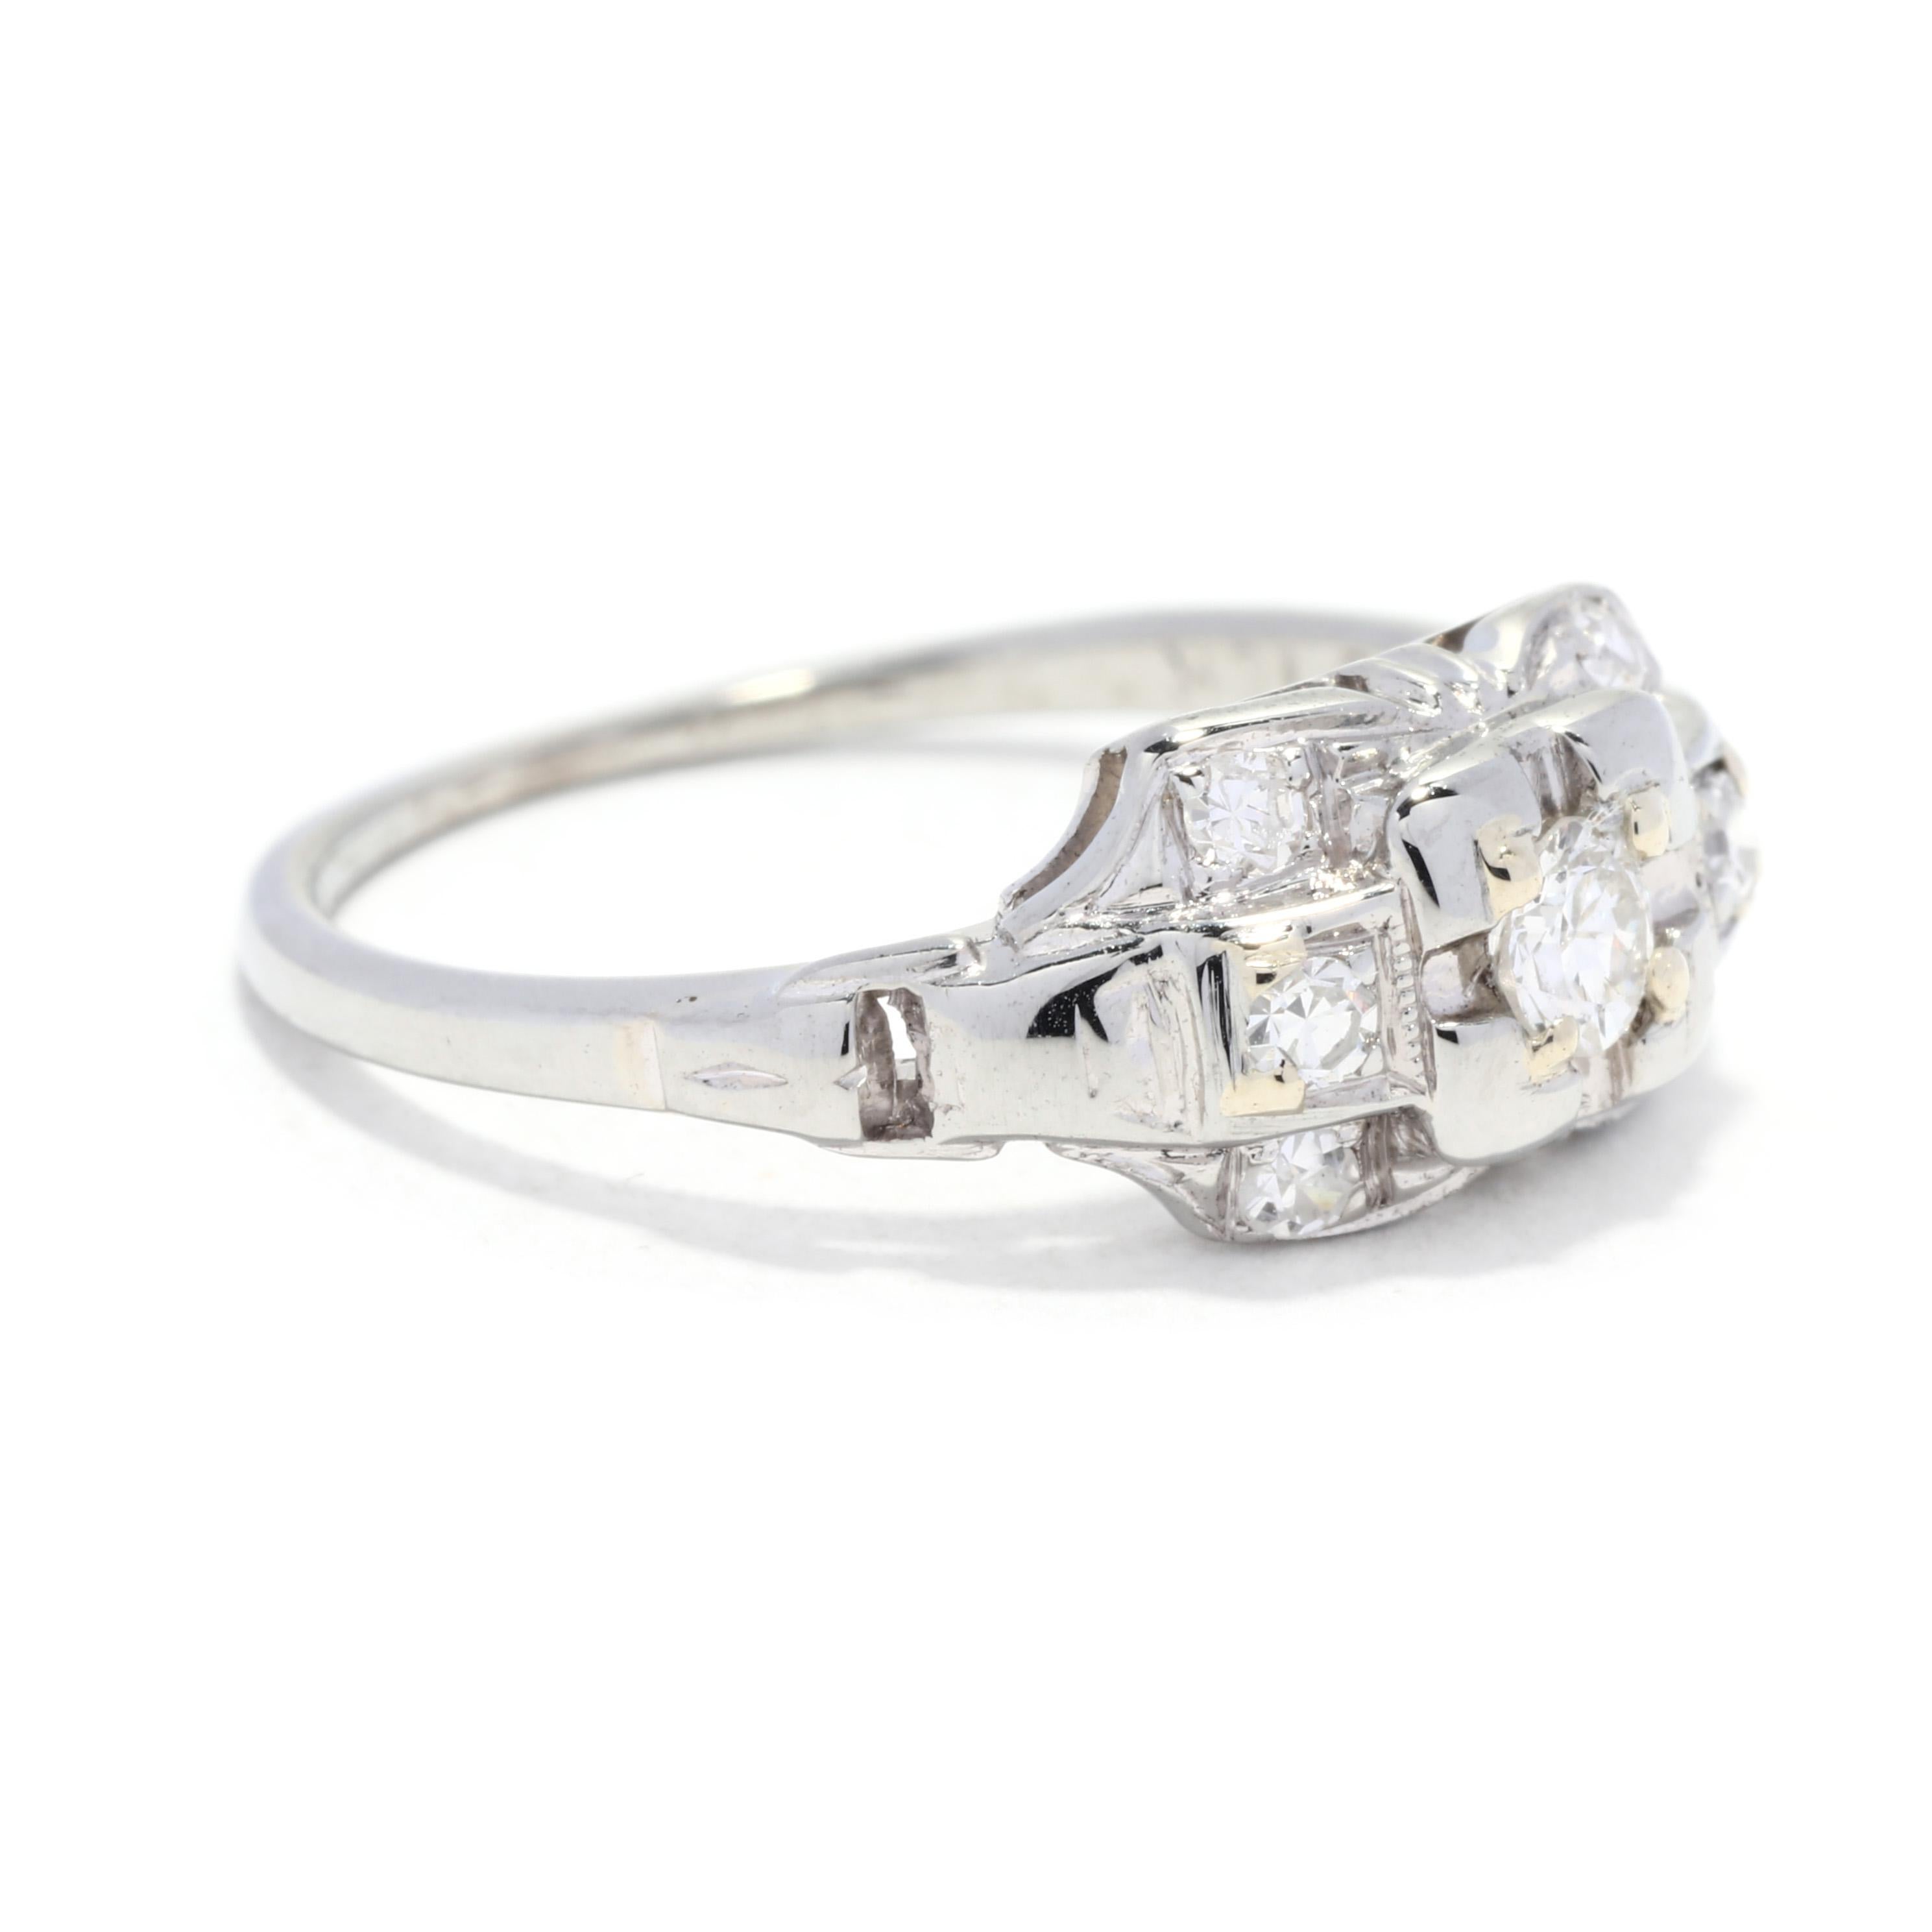 An Art Deco Traub old European cut diamond engagement ring. This antique orange blossom engagement ring features a horizontal rectangular design set with an old European cut diamond center stone weighing approximately .12 carat surrounded by single